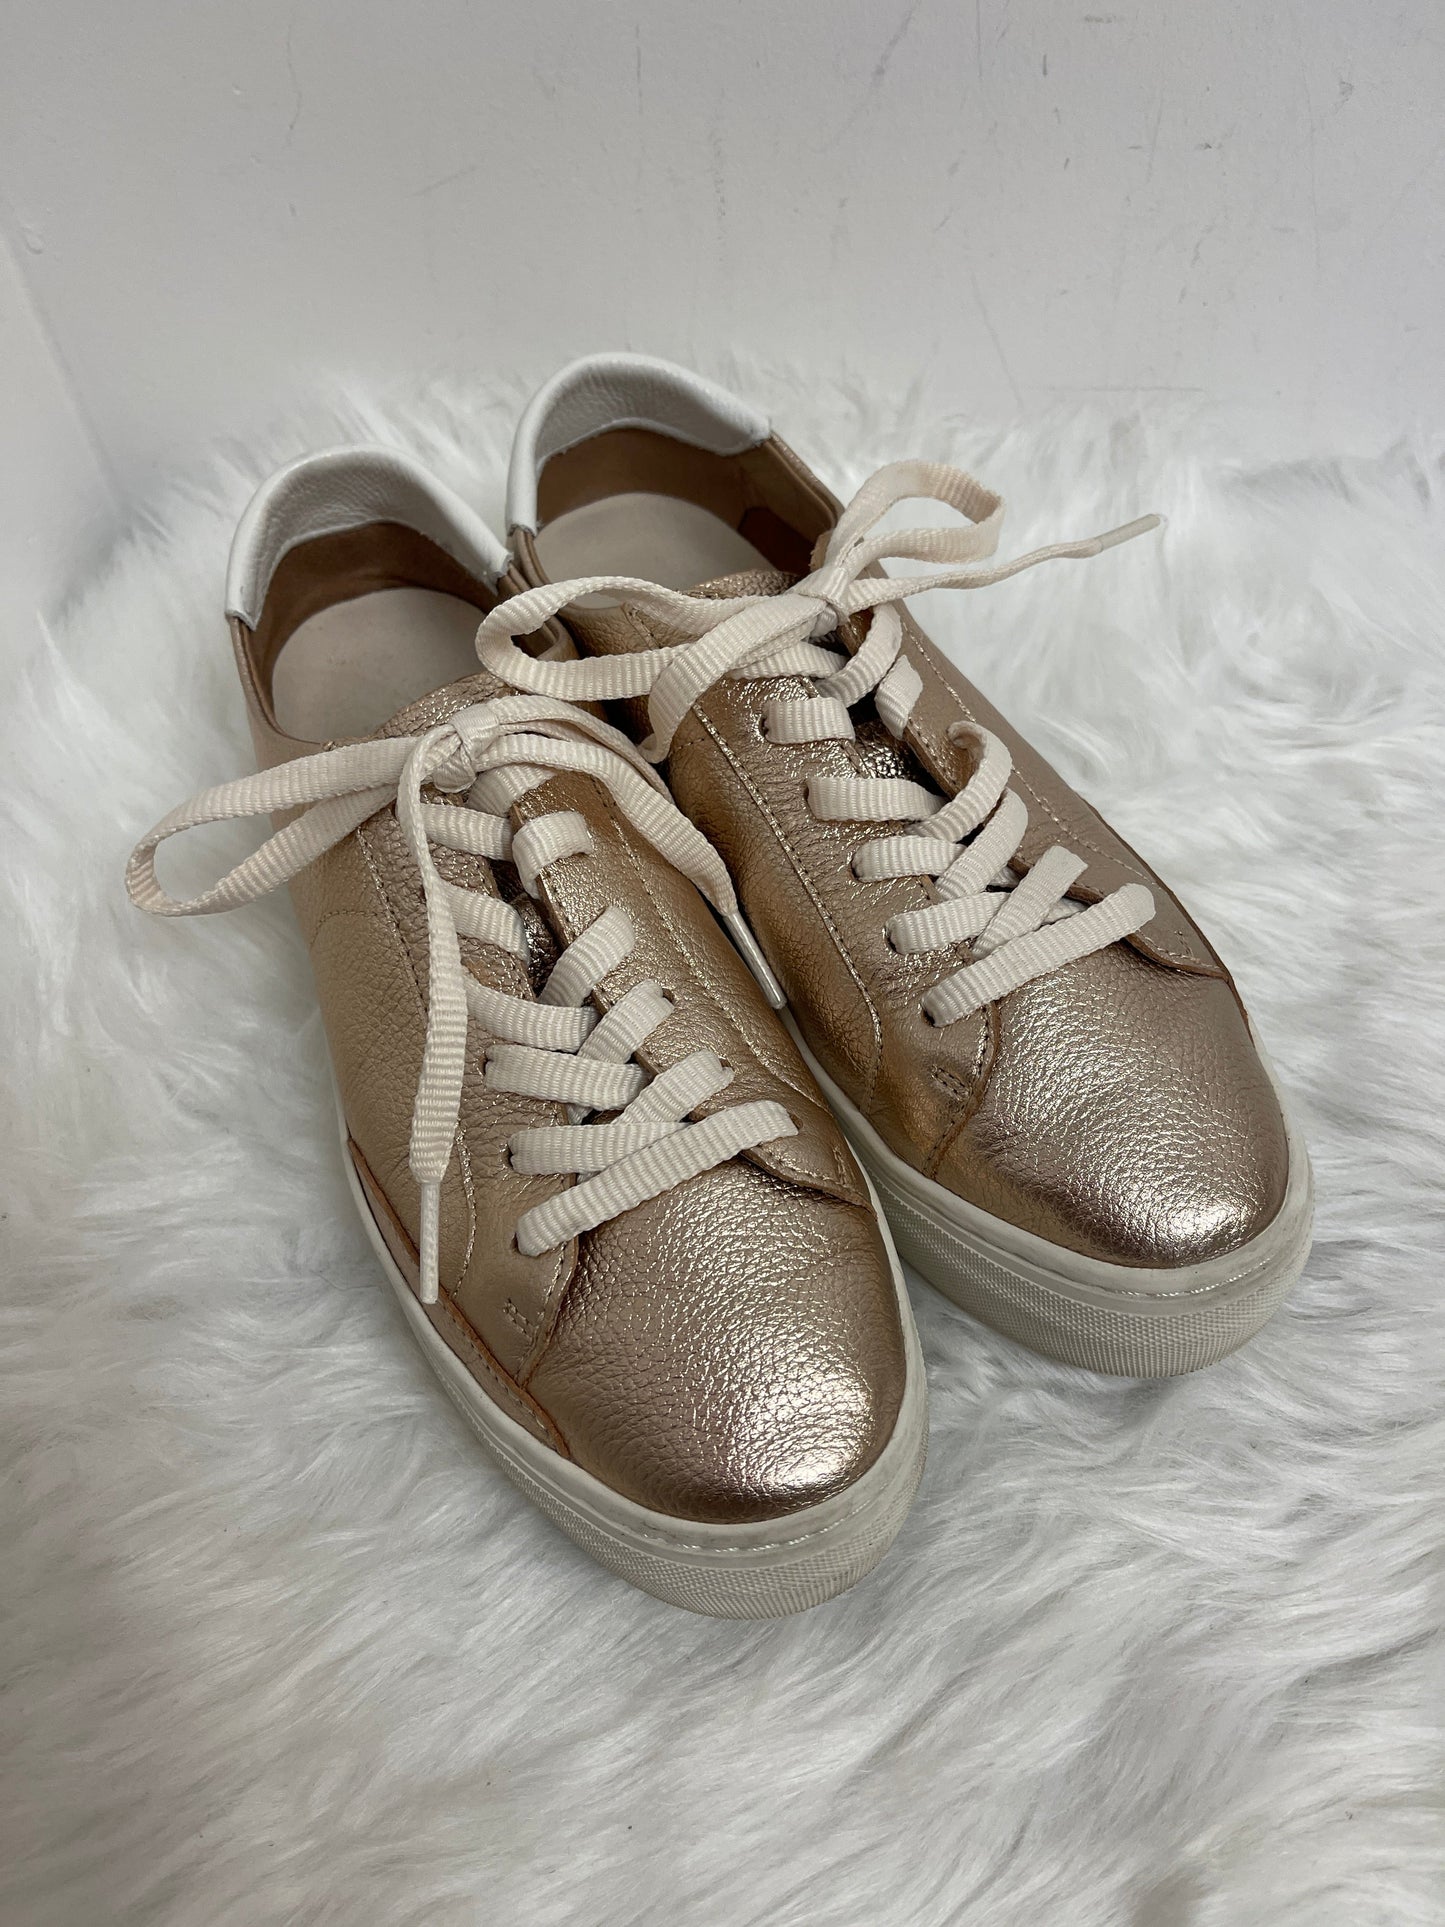 Gold Shoes Sneakers Soludos, Size 8